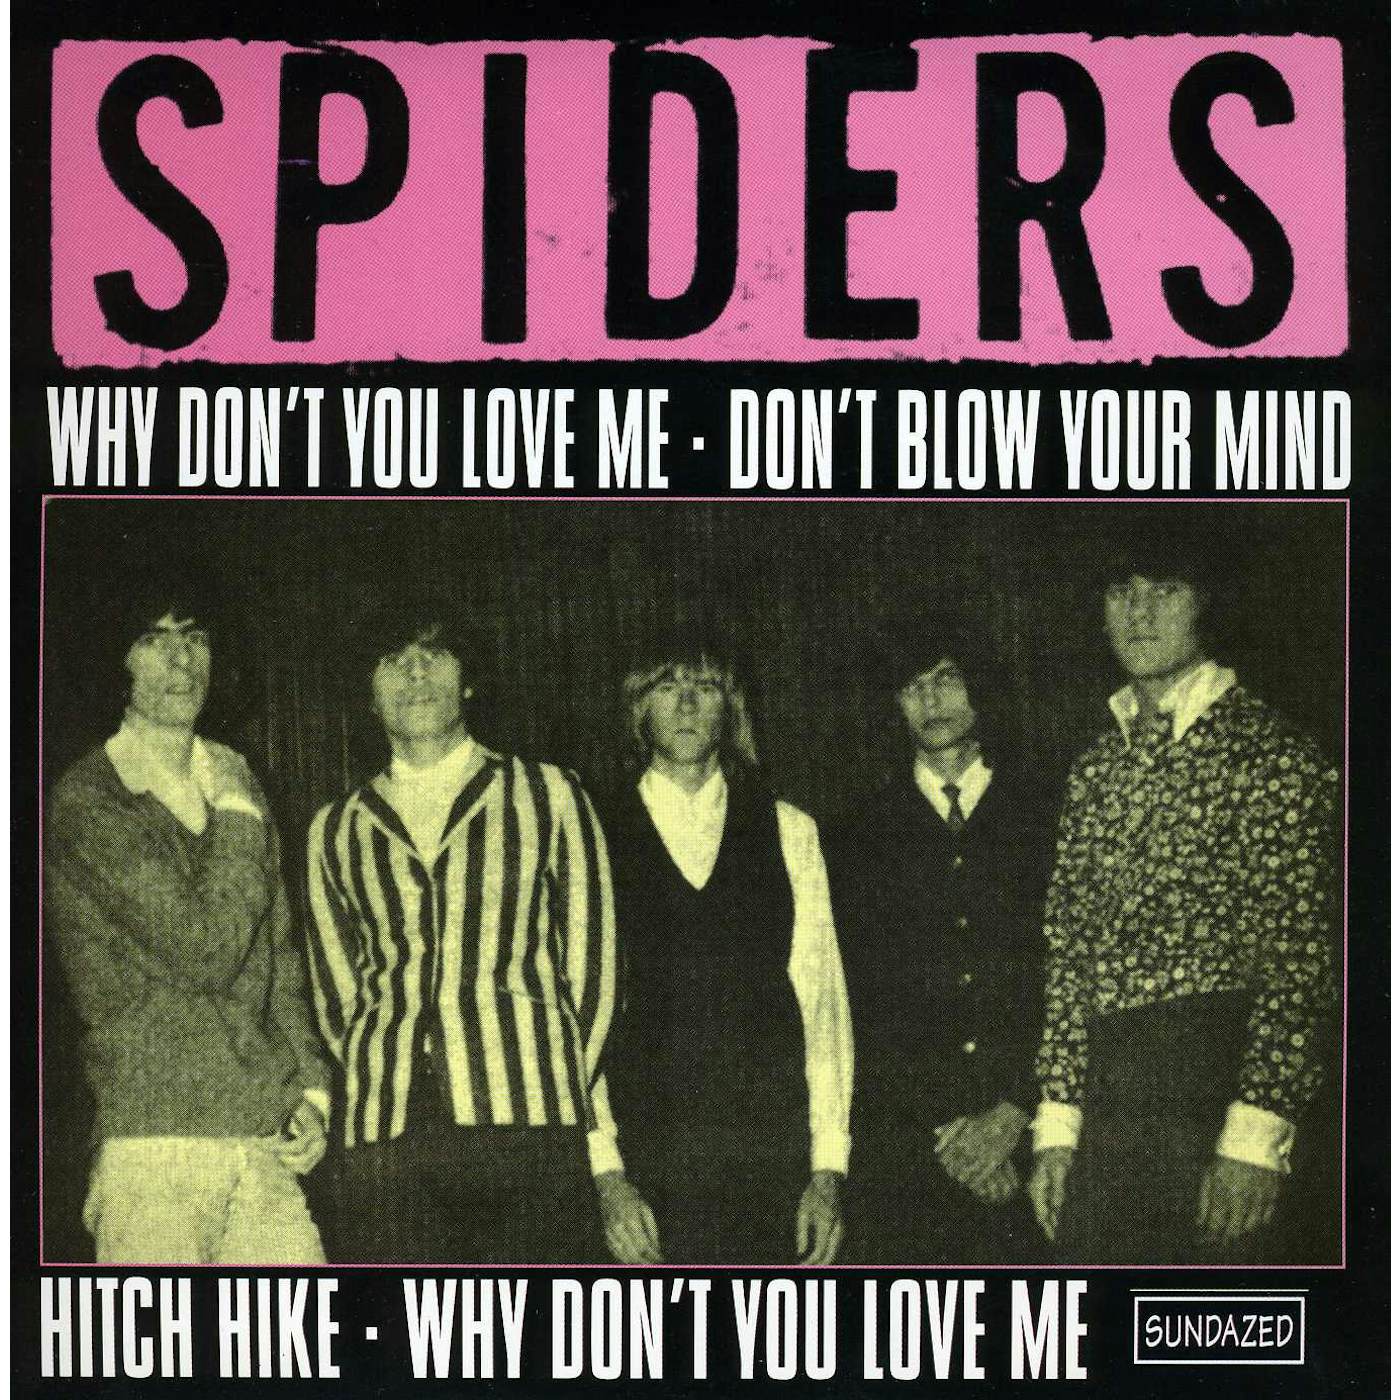 Spiders WHY DONT YOU LOVE ME Vinyl Record